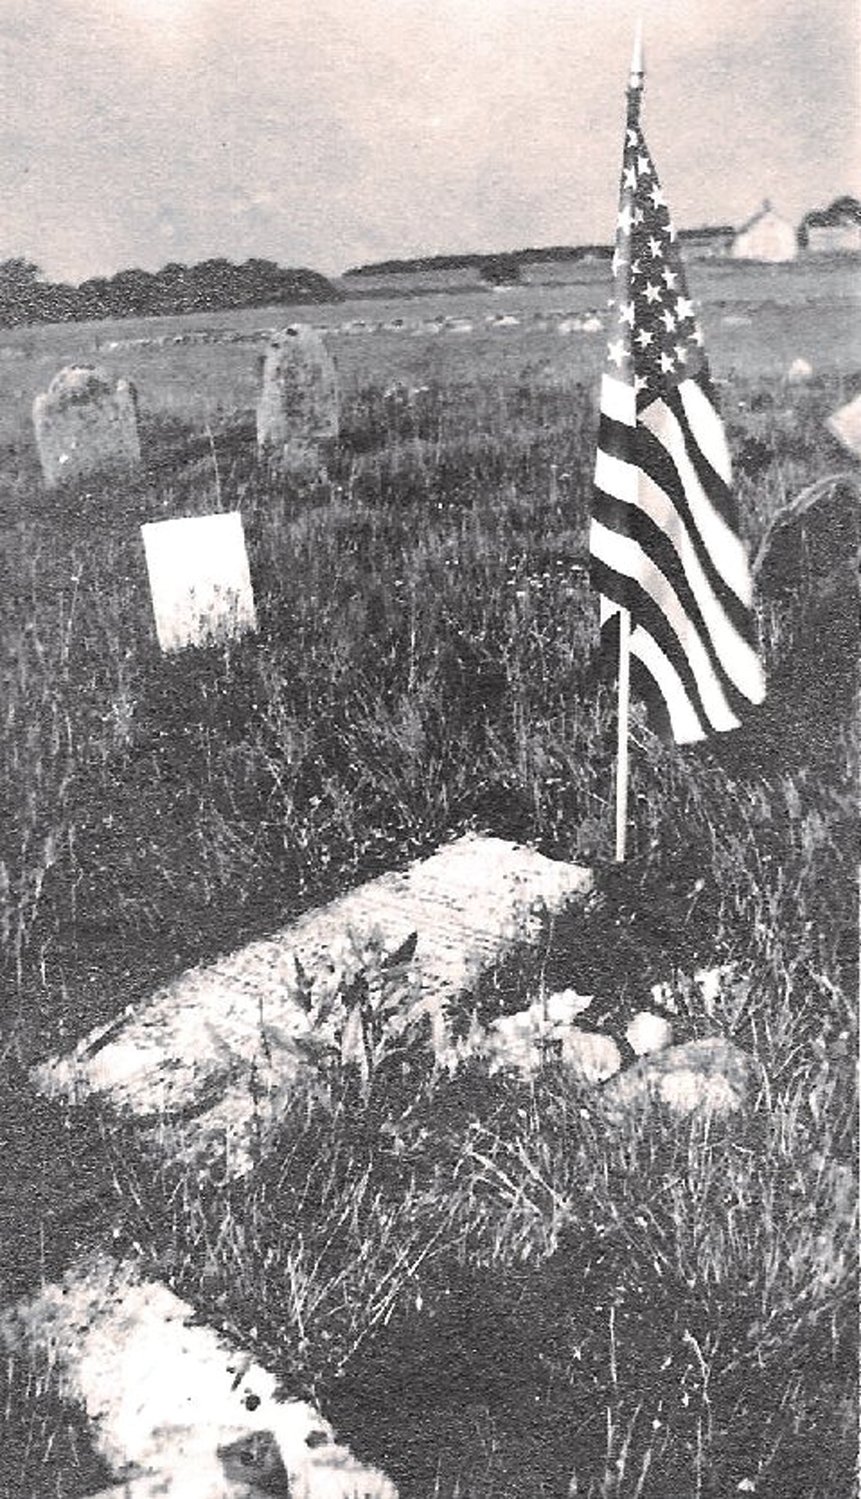 ORIGINAL RESTING PLACE: Israel Angell's first place of interment at what’s now known as Rhode Island Historical Cemetery Johnston 43.